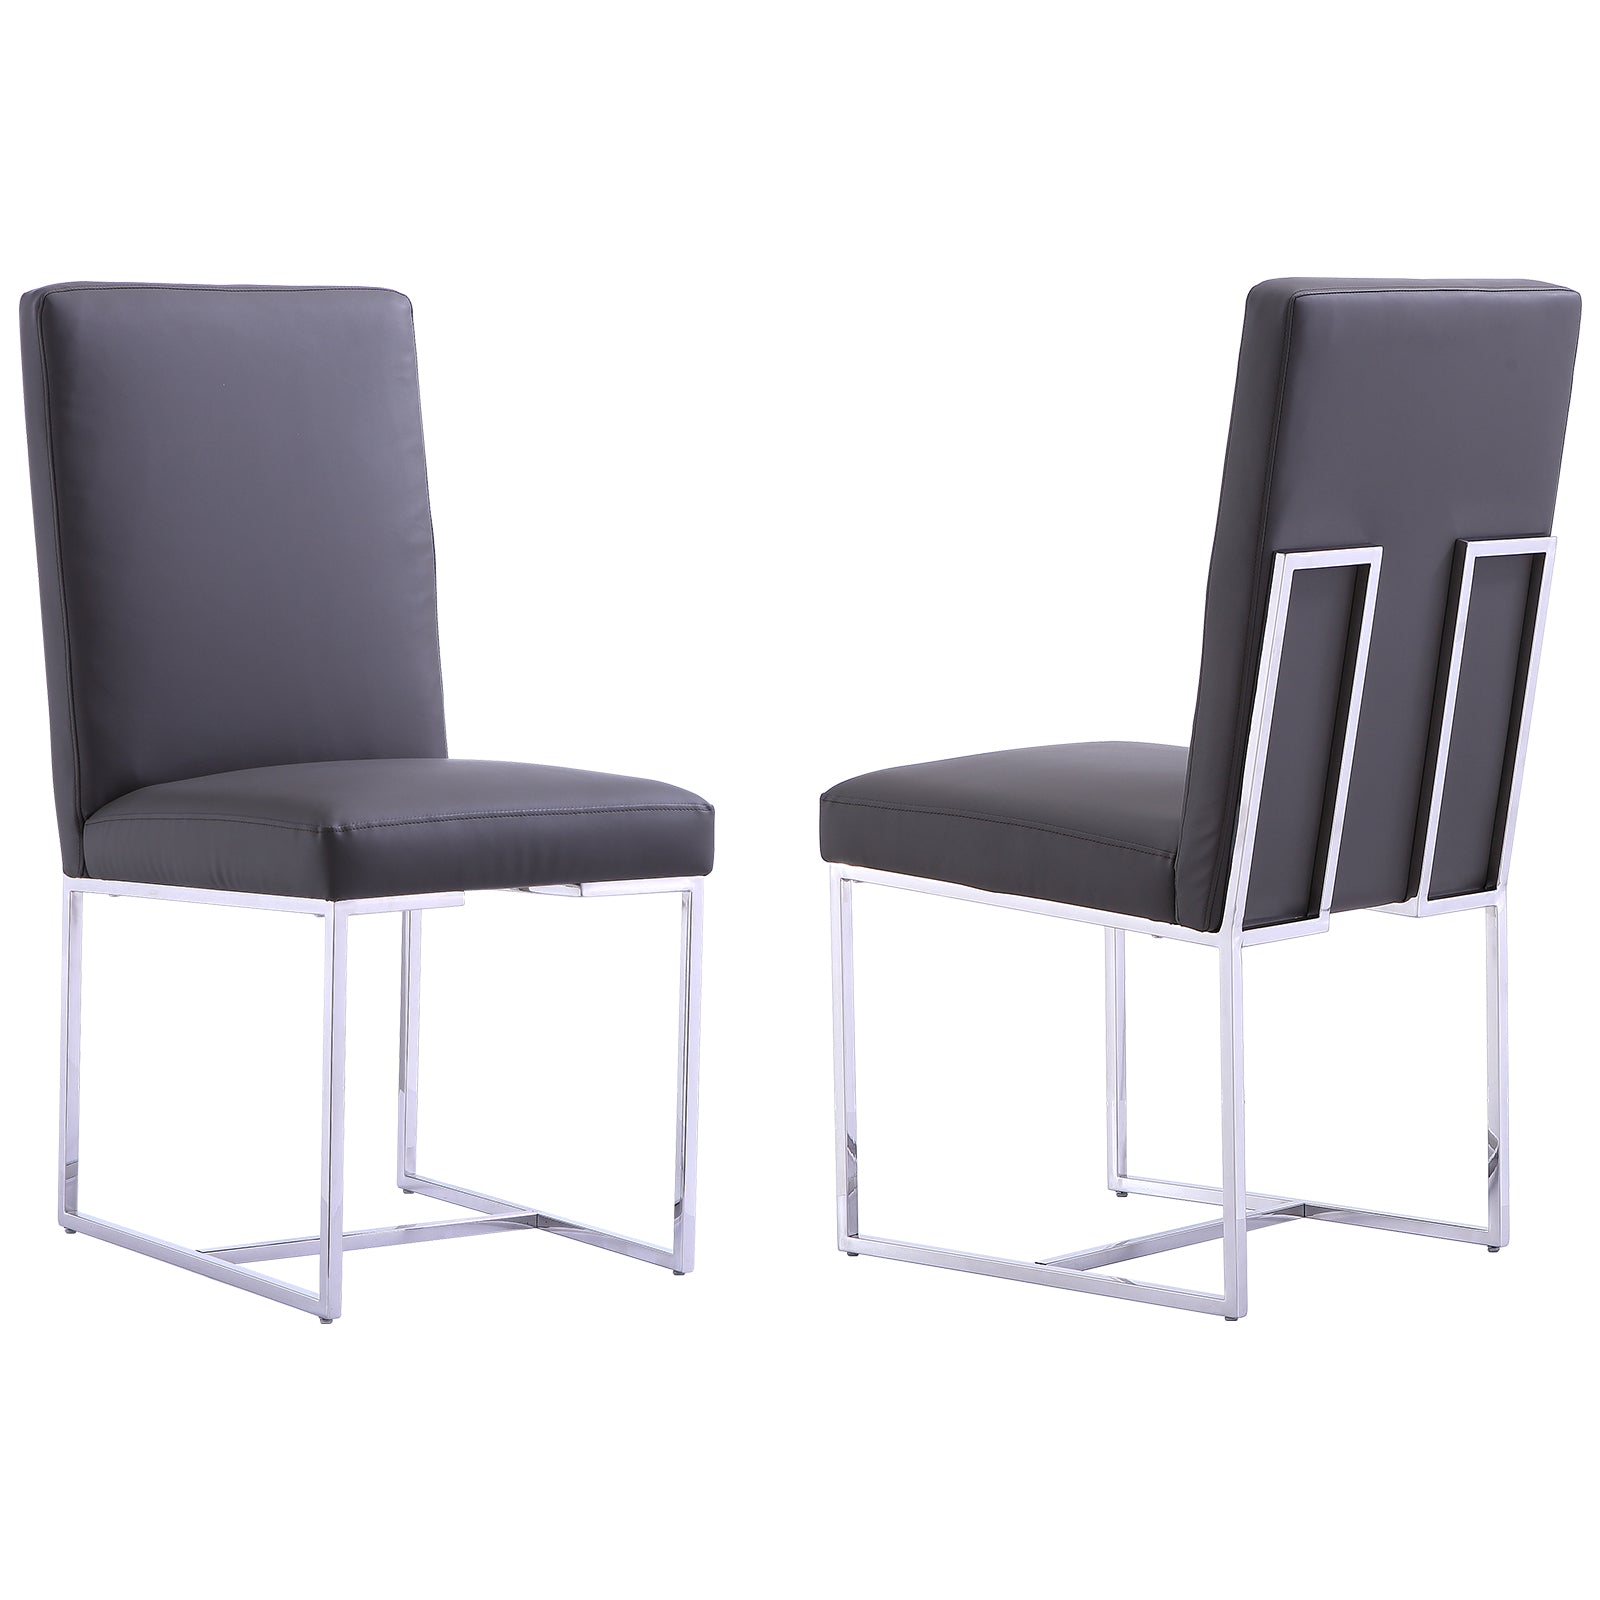 AUZ Gray Velvet Dining Chairs - Elegance and Versatility Combined